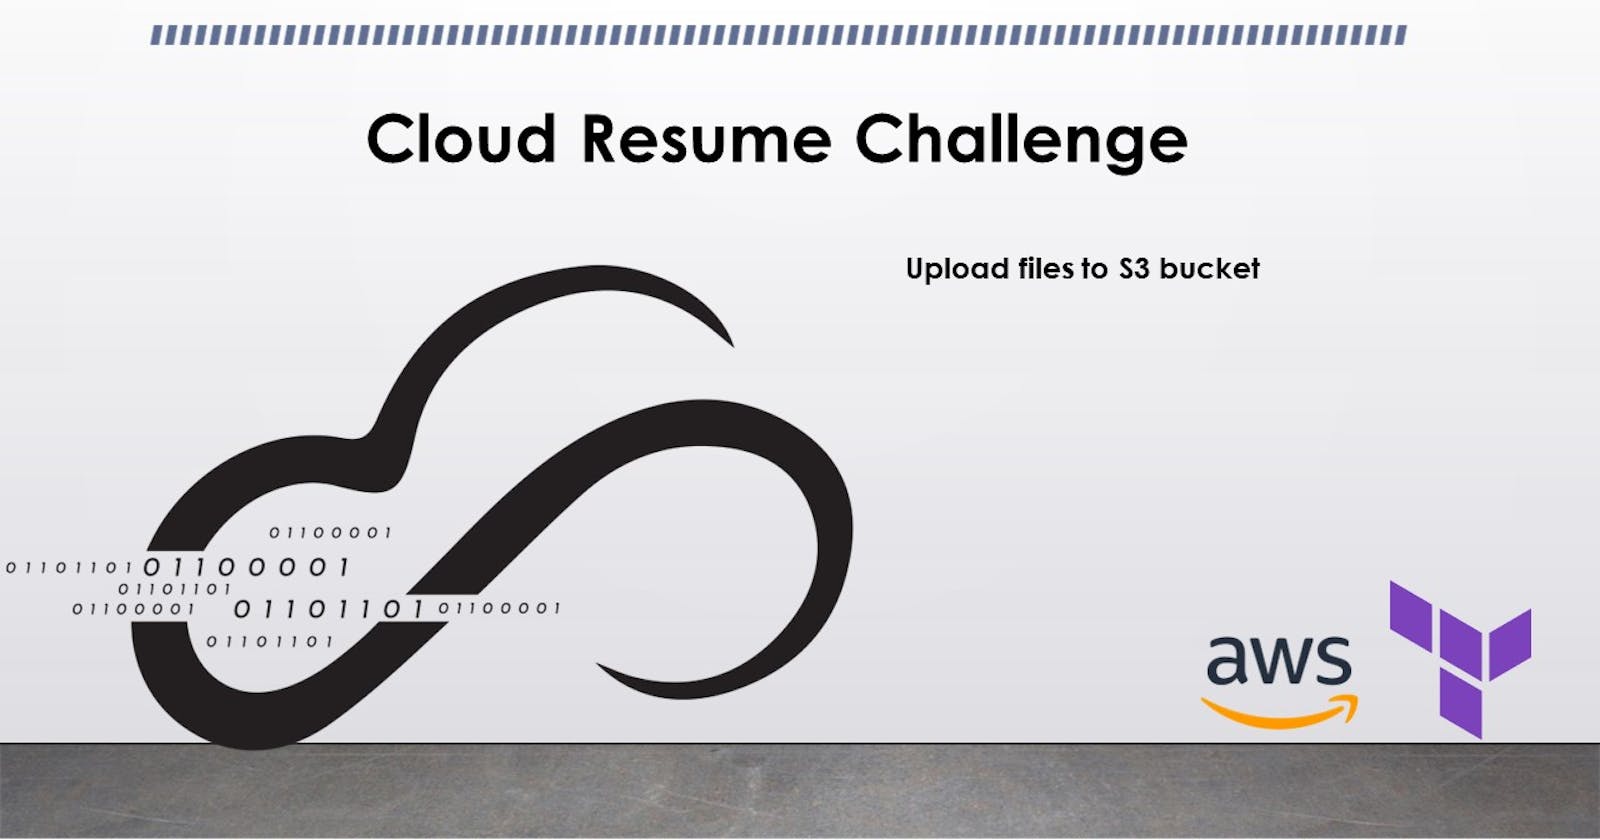 4. Cloud Resume Challenge: Upload Site Files to S3